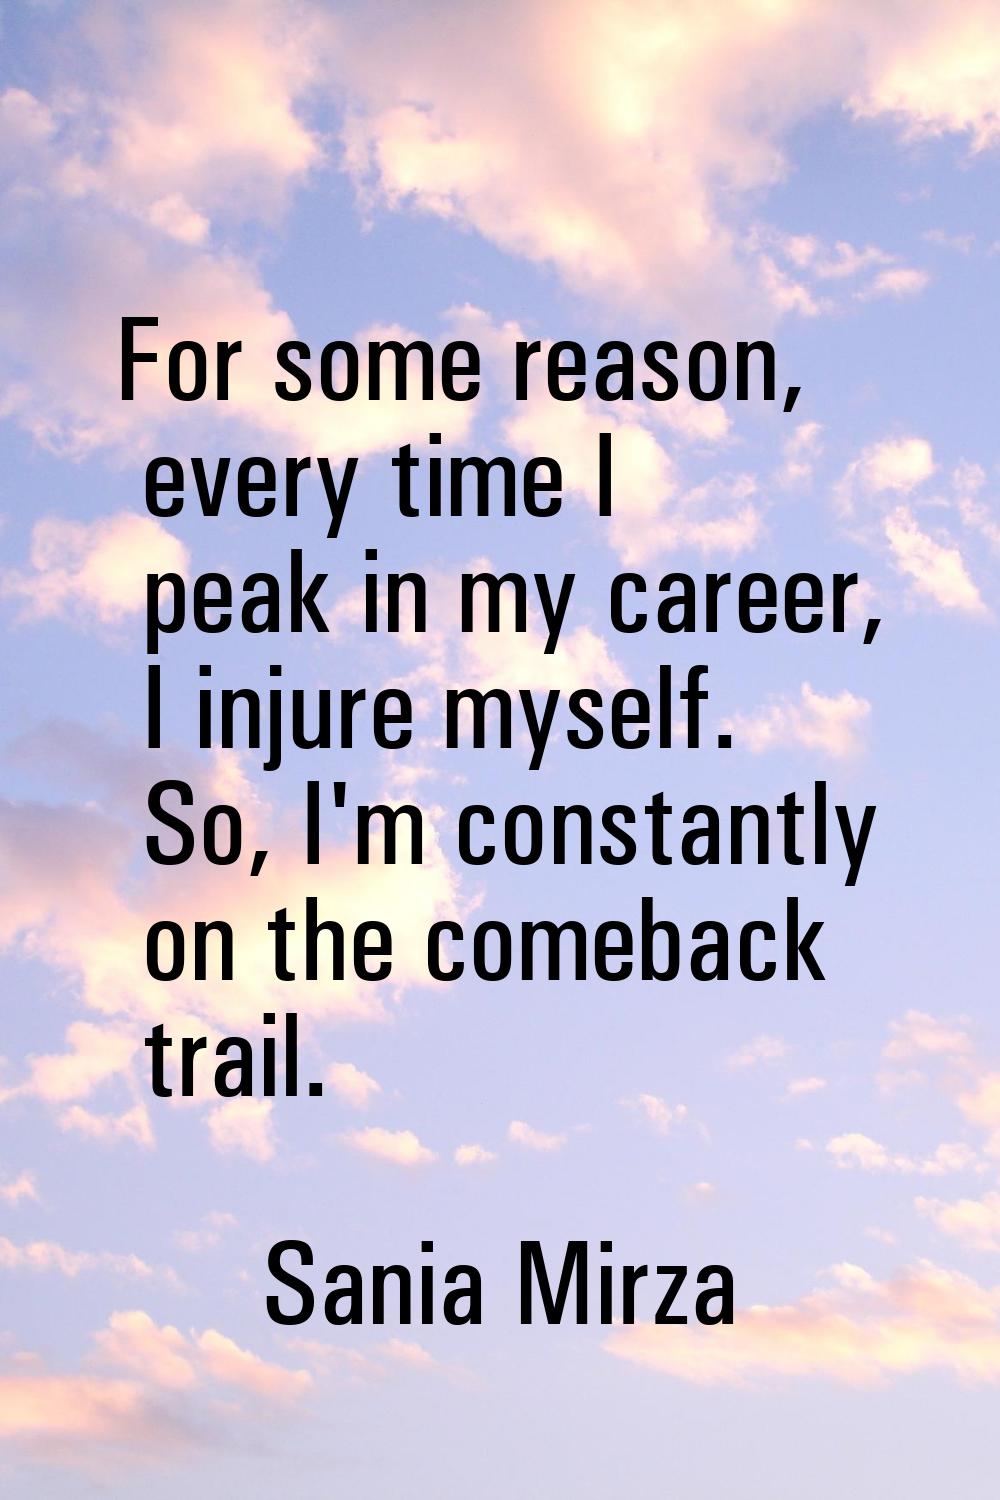 For some reason, every time I peak in my career, I injure myself. So, I'm constantly on the comebac